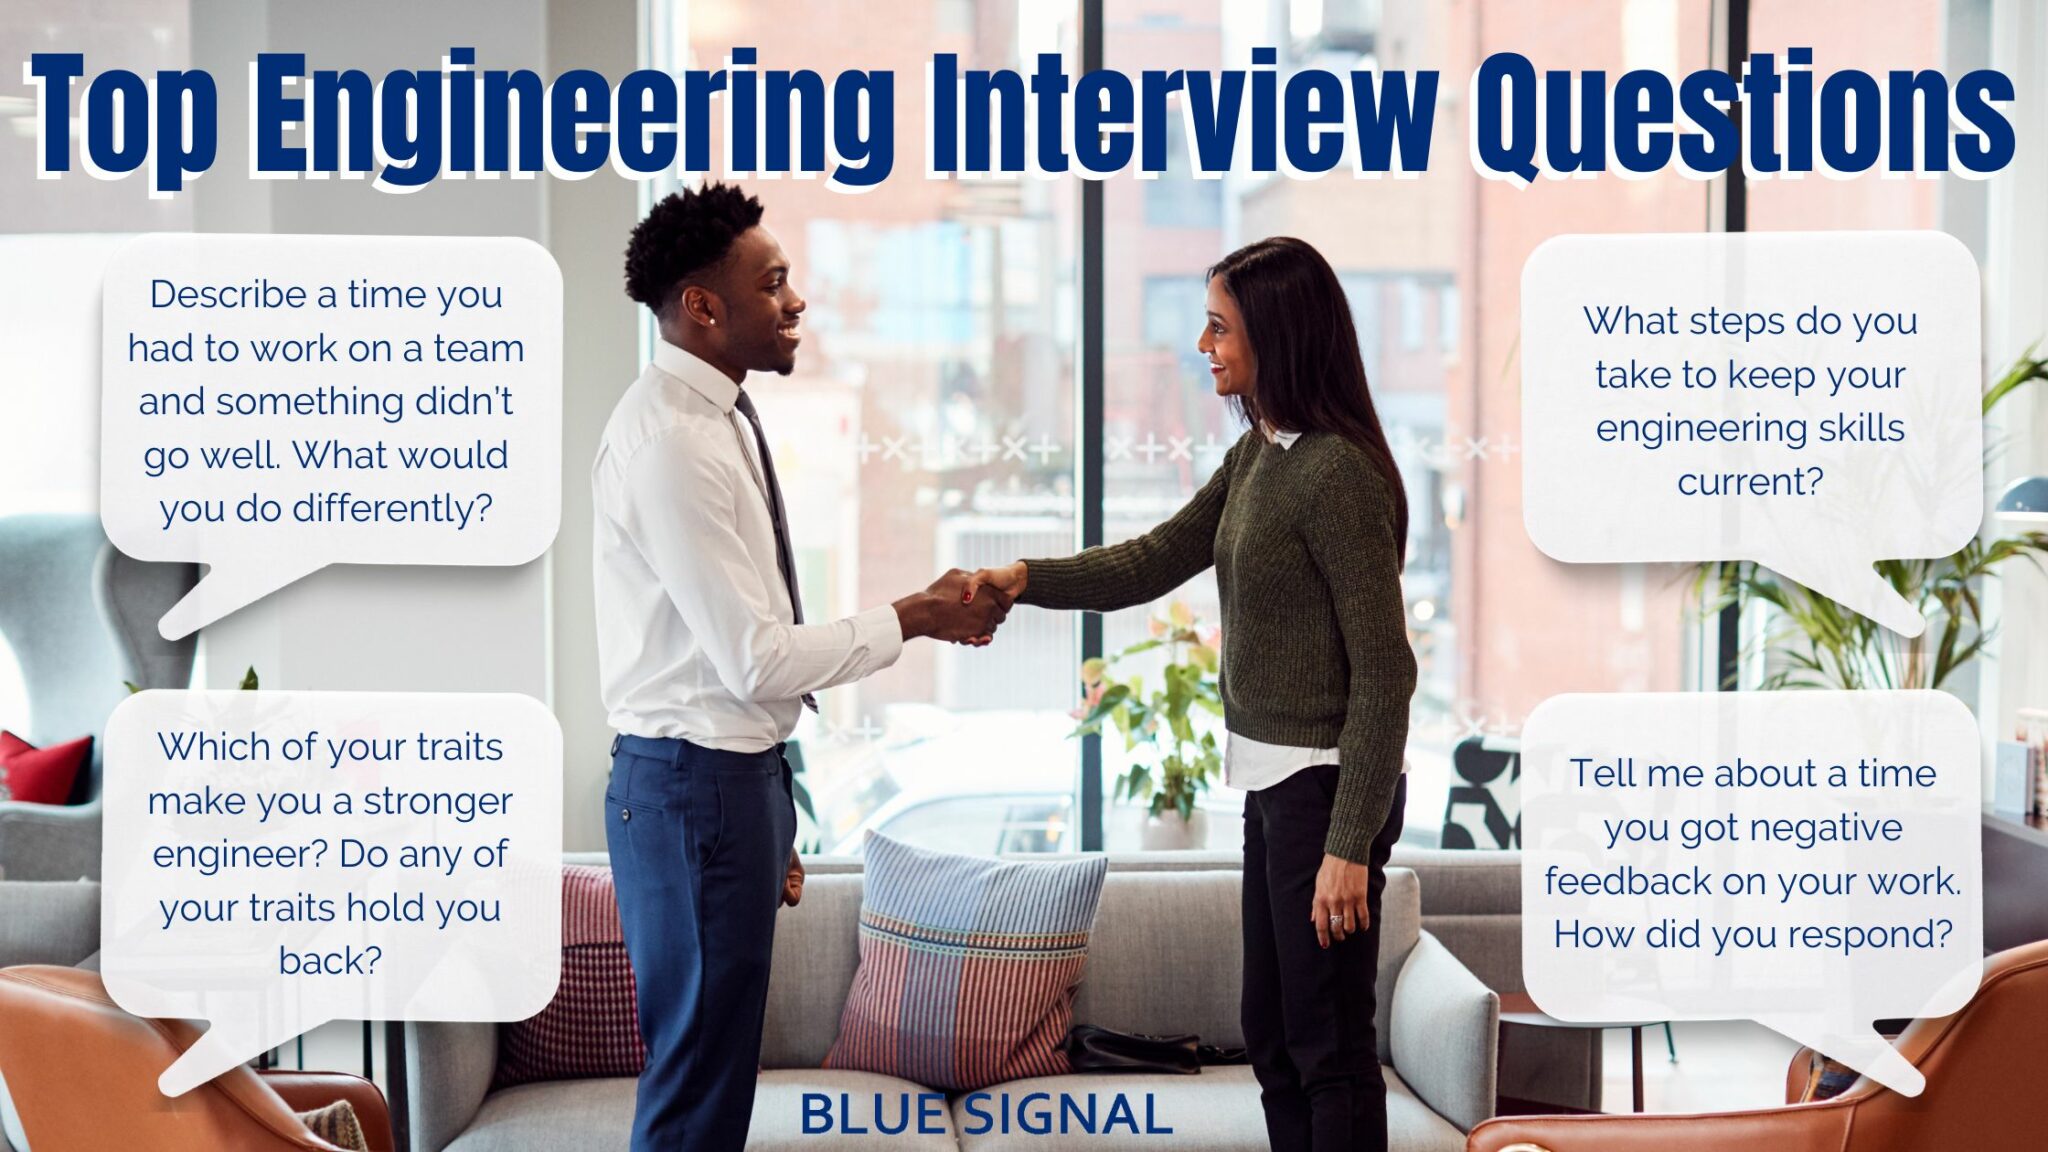 A man and woman dressed professionally shaking hands in an office with word bubbles around highlighting engineering interview questions